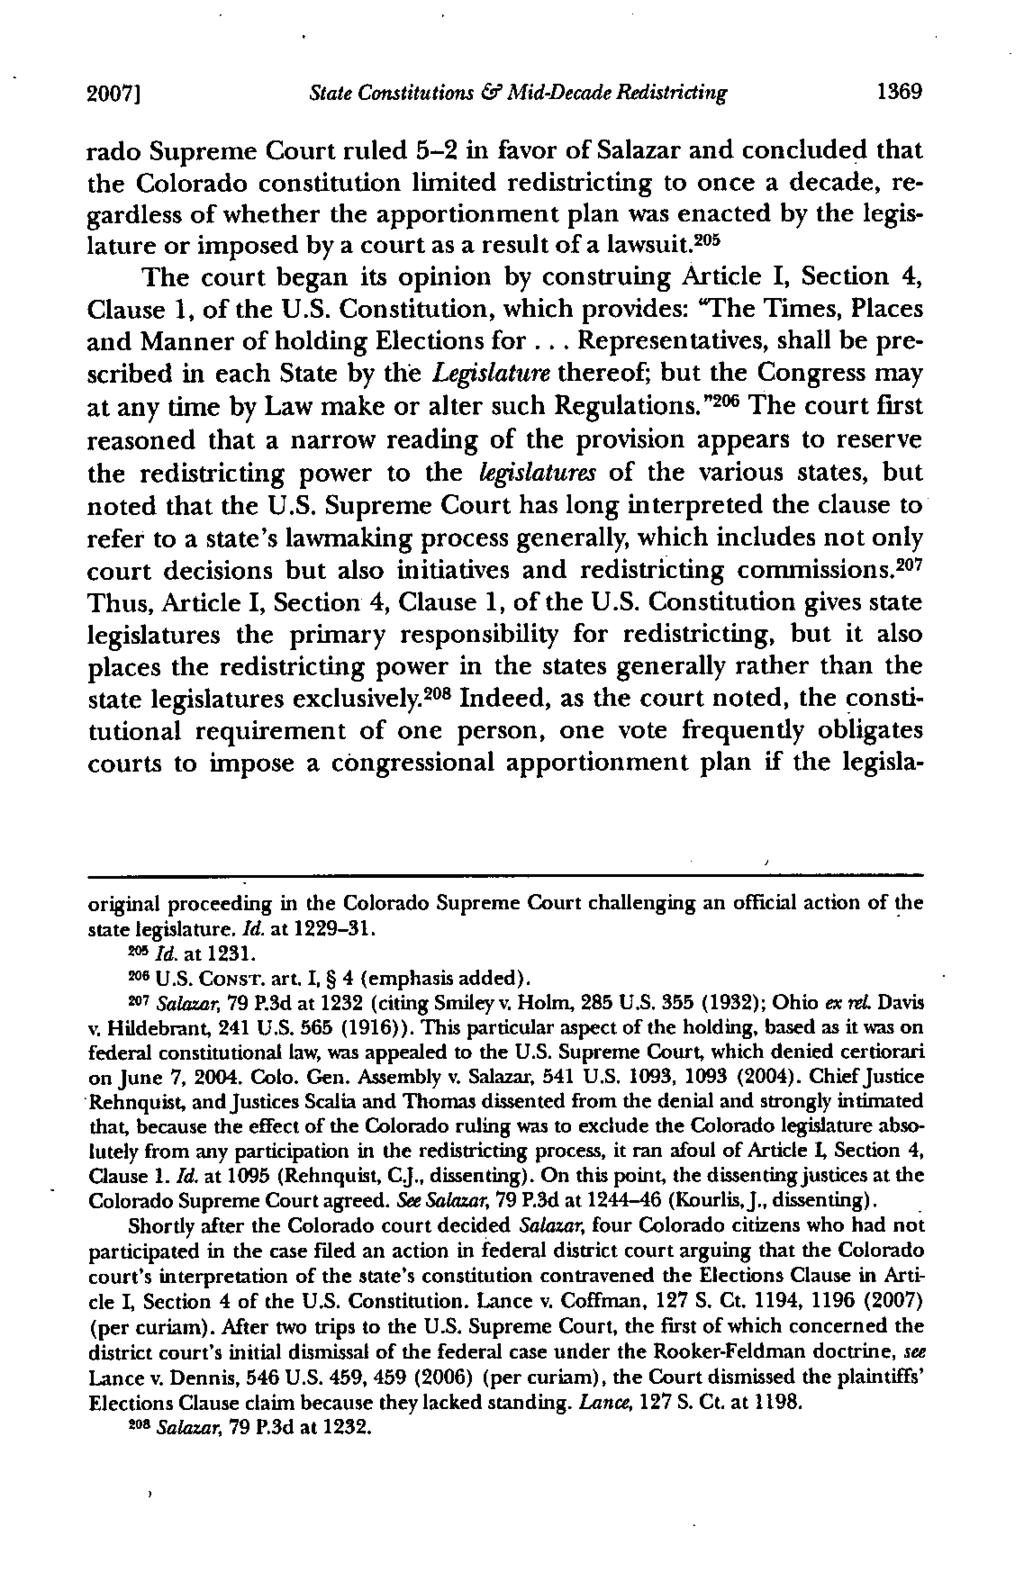 2007] State Constitutions & Mid-Decade Redistricting 1369 rado Supreme Court ruled 5-2 in favor of Salazar and concluded that the Colorado constitution limited redistricting to once a decade,